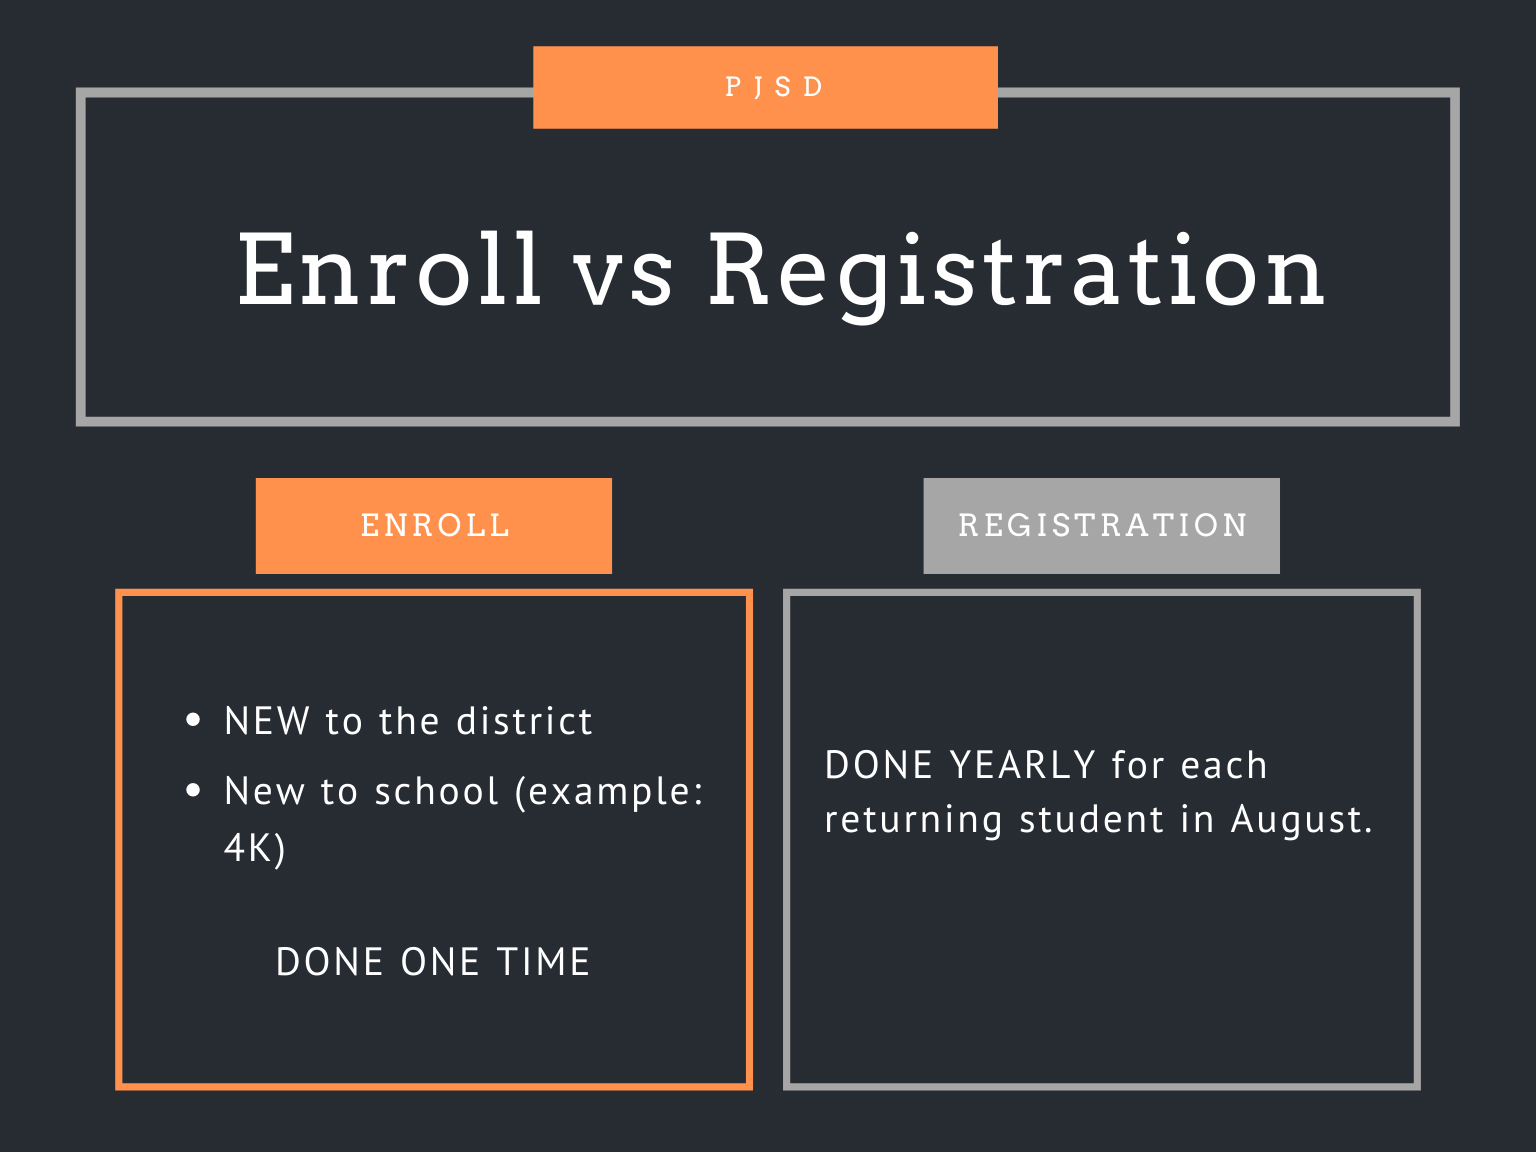 chart explaining enrollment is first time in district and registration is every year after